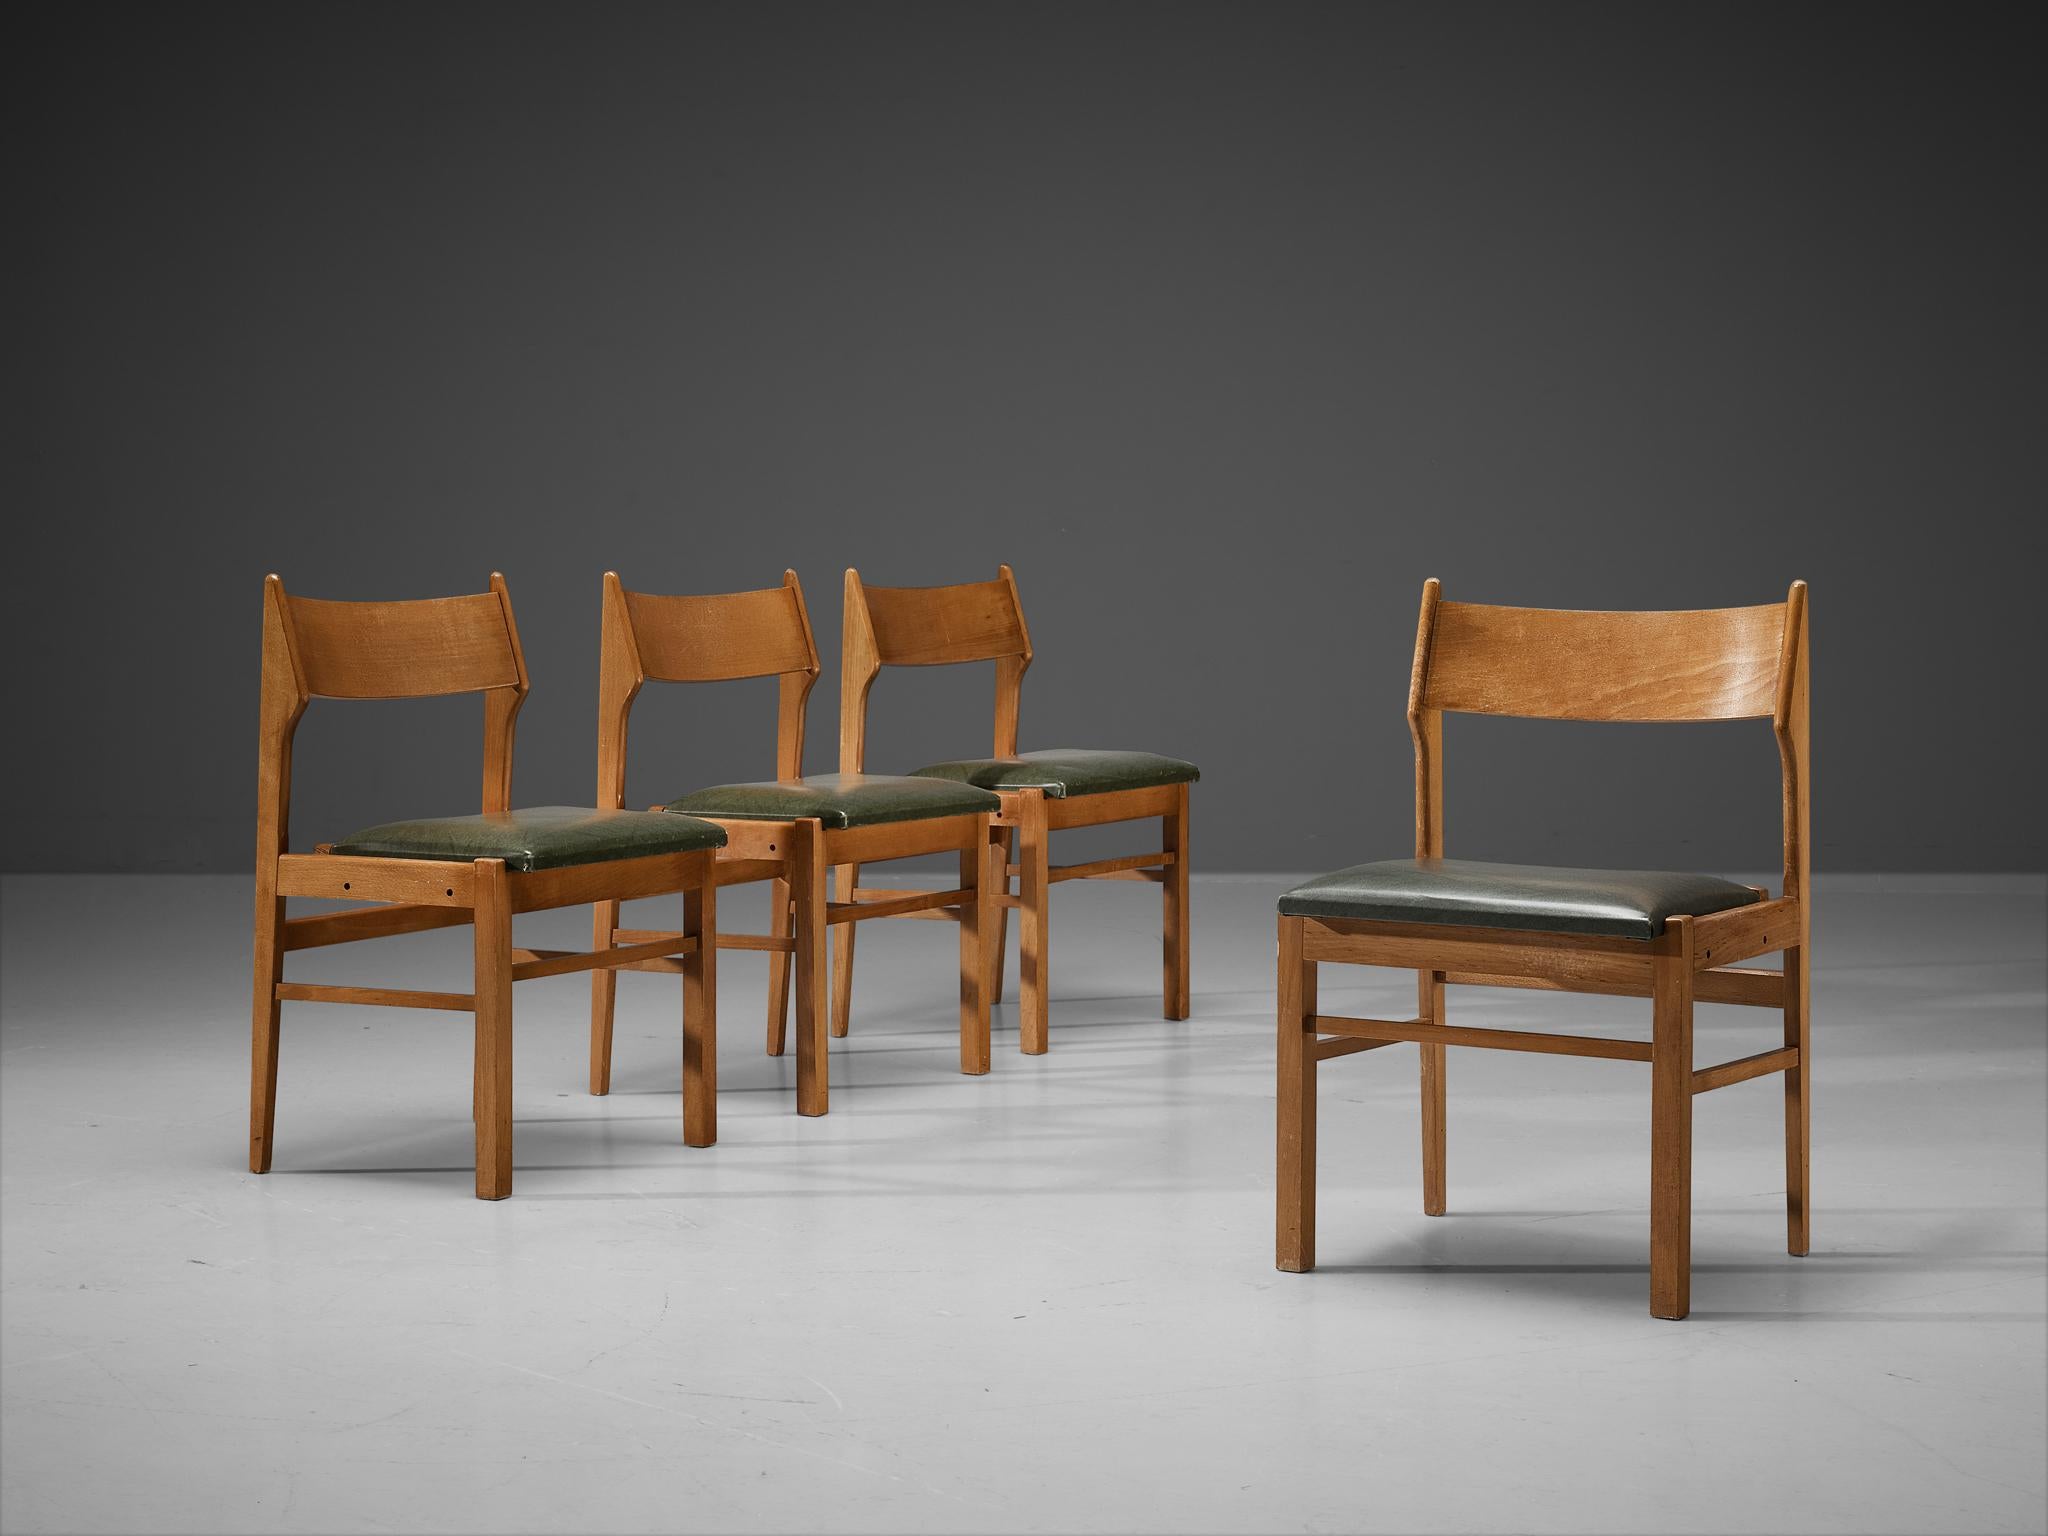 Dining chairs, wood, dark green leatherette, The Netherlands, 1960s. 

Modest set of four Dutch dining chairs. Its design shows clear lines and an airy backrest. The dark green leatherette seats give a striking contrast with the warm color of the